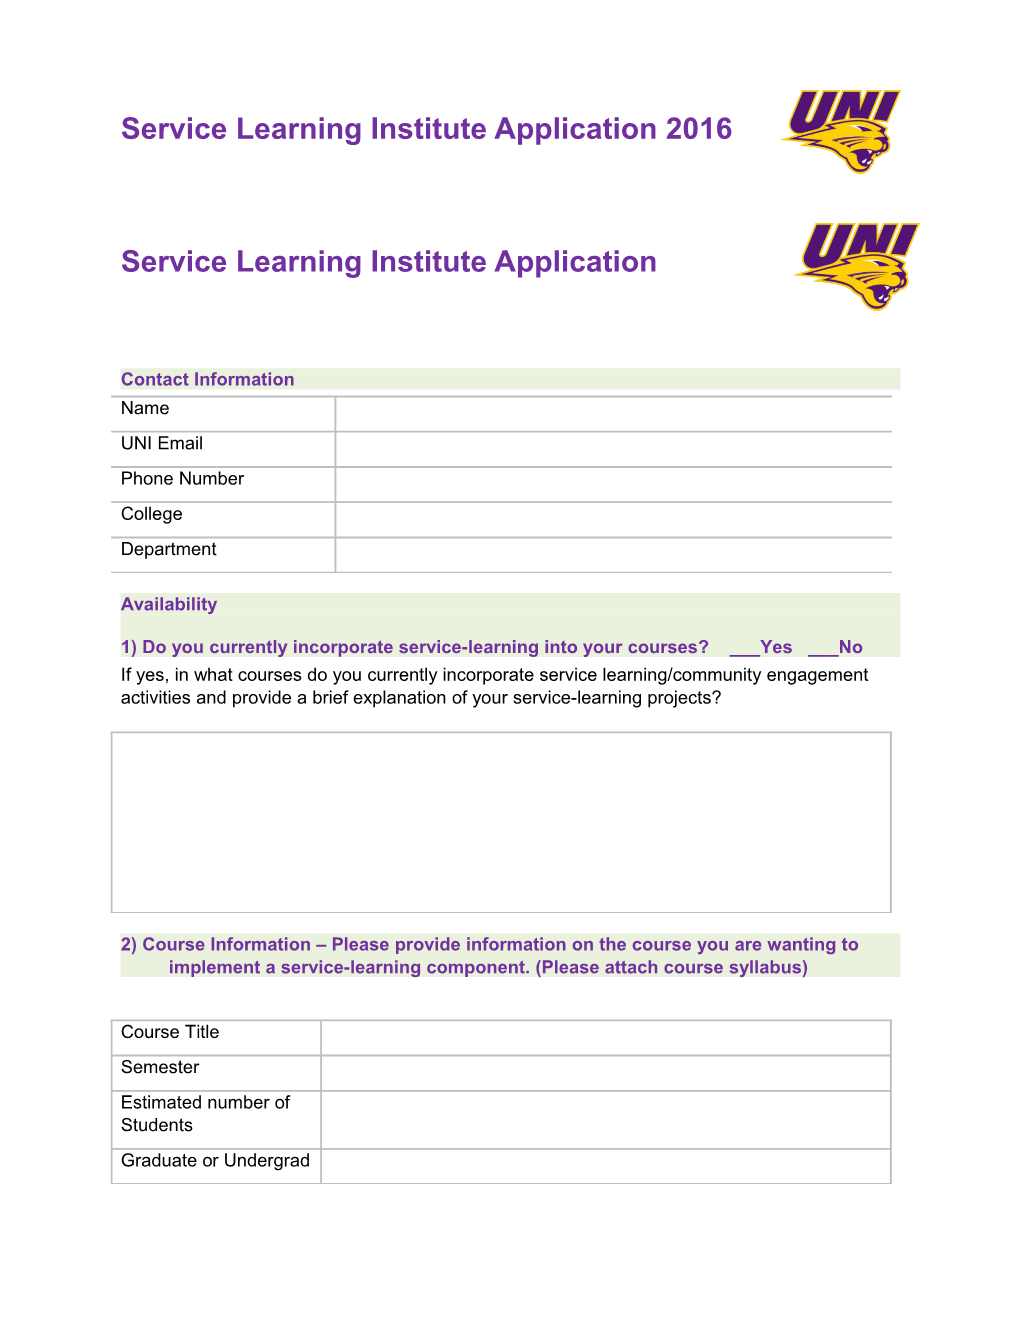 Service Learning Institute Application 2016